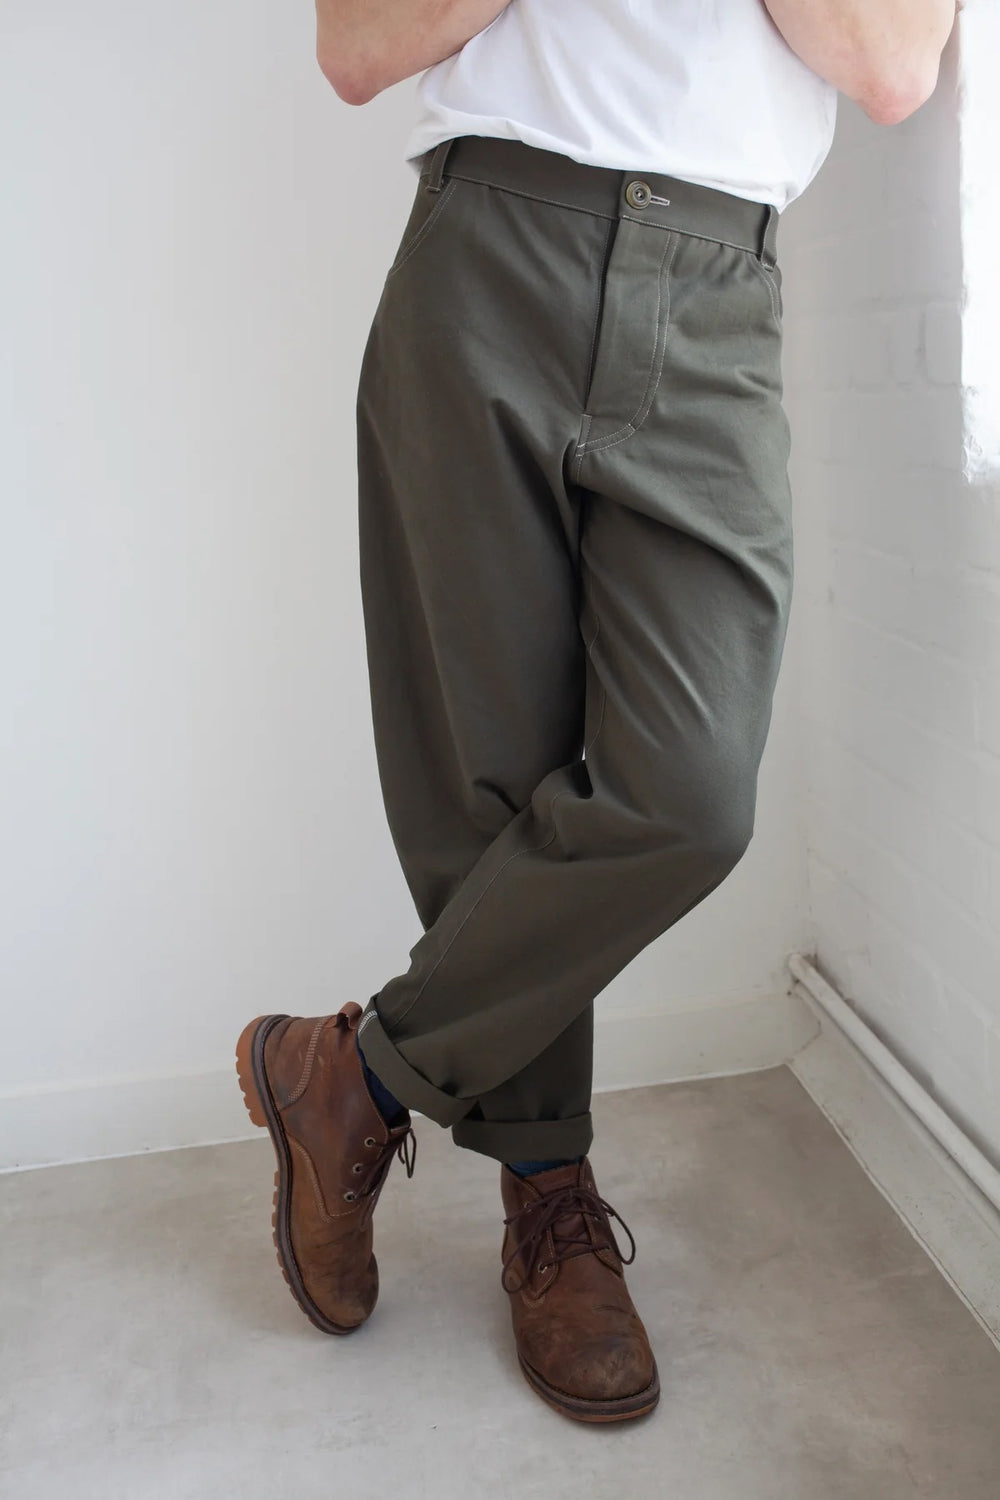 Man wearing the Men's Worker Trousers sewing pattern from The Modern Sewing Co. on The Fold Line. A trousers pattern made in medium/heavy denim, medium/heavy twill, canvas, corduroy/needlecord, wool suiting, or sturdy linen fabric, featuring a slight ball